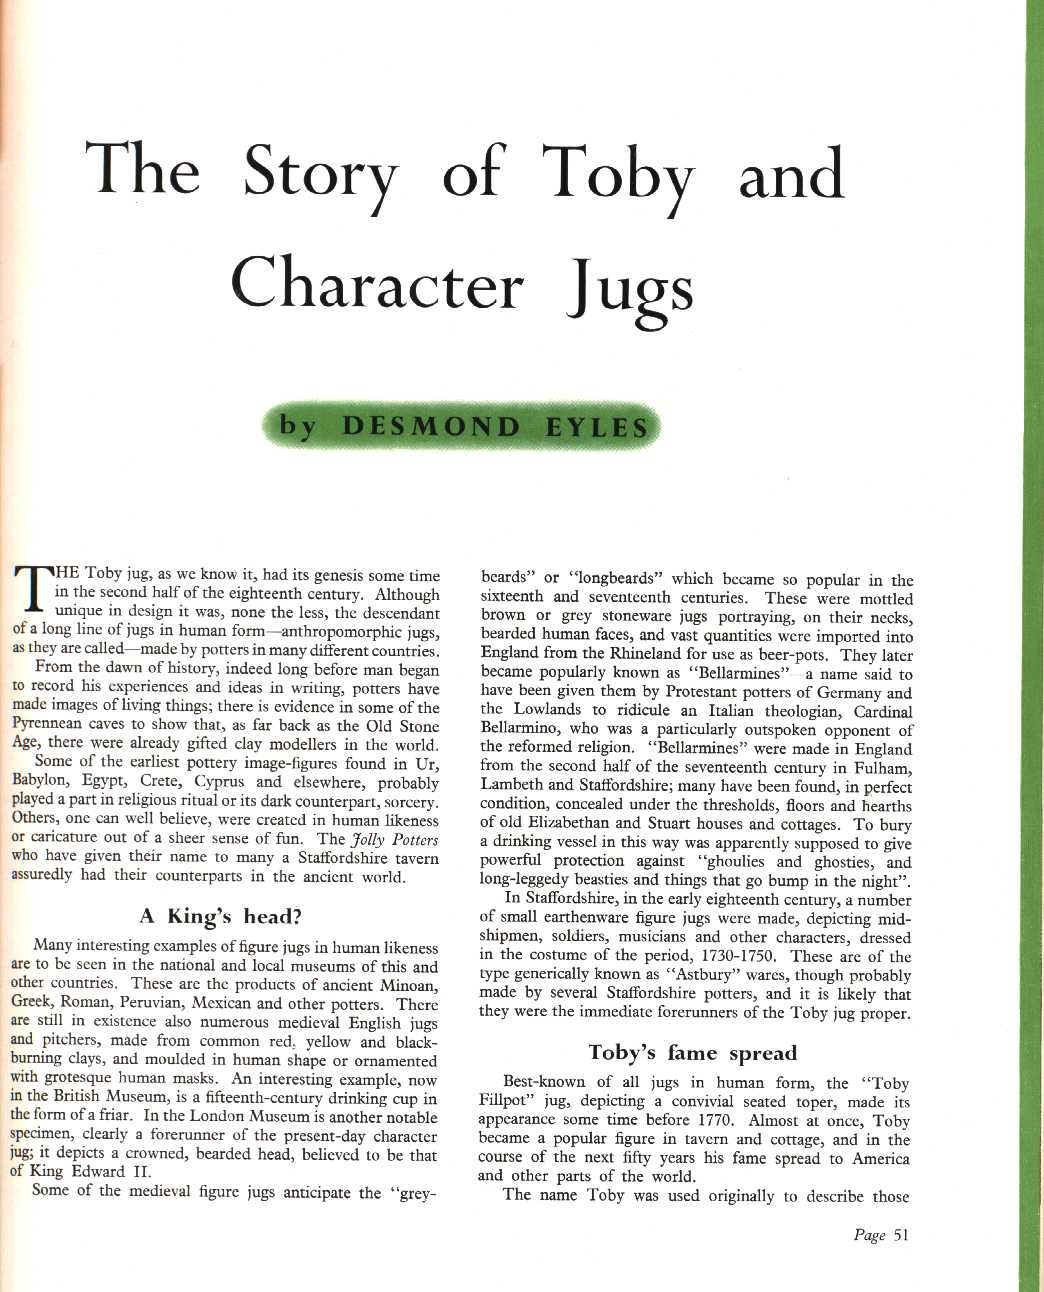 The story of Toby and character jugs